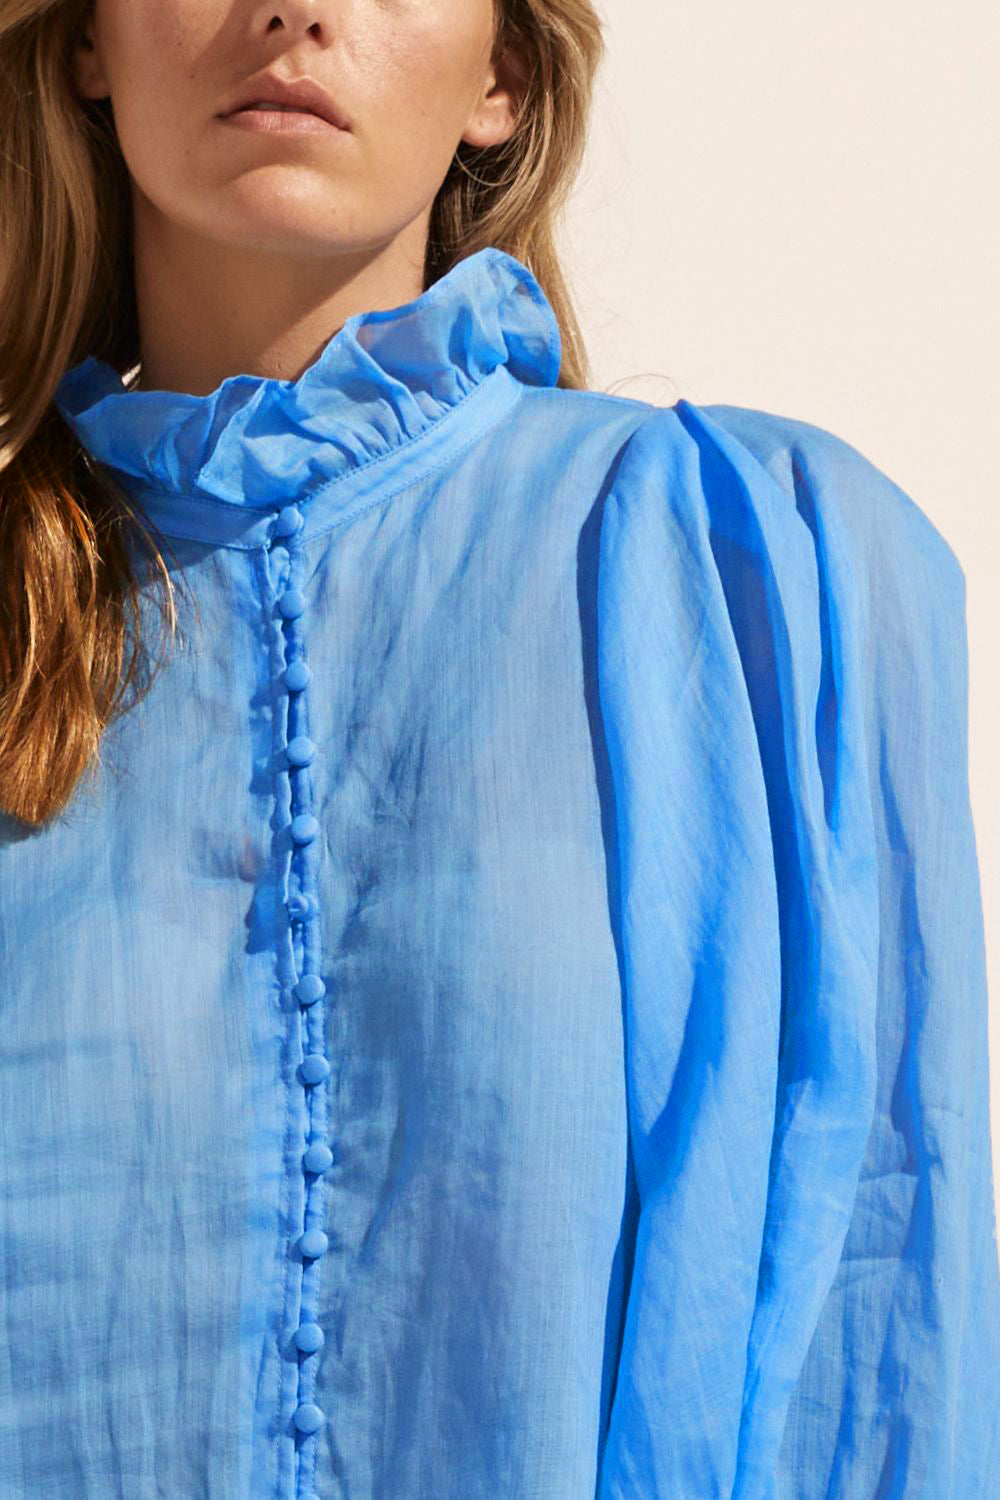 blue, ruffle neck collar, buttons down centre, mid length sleeve, shirt, close up view